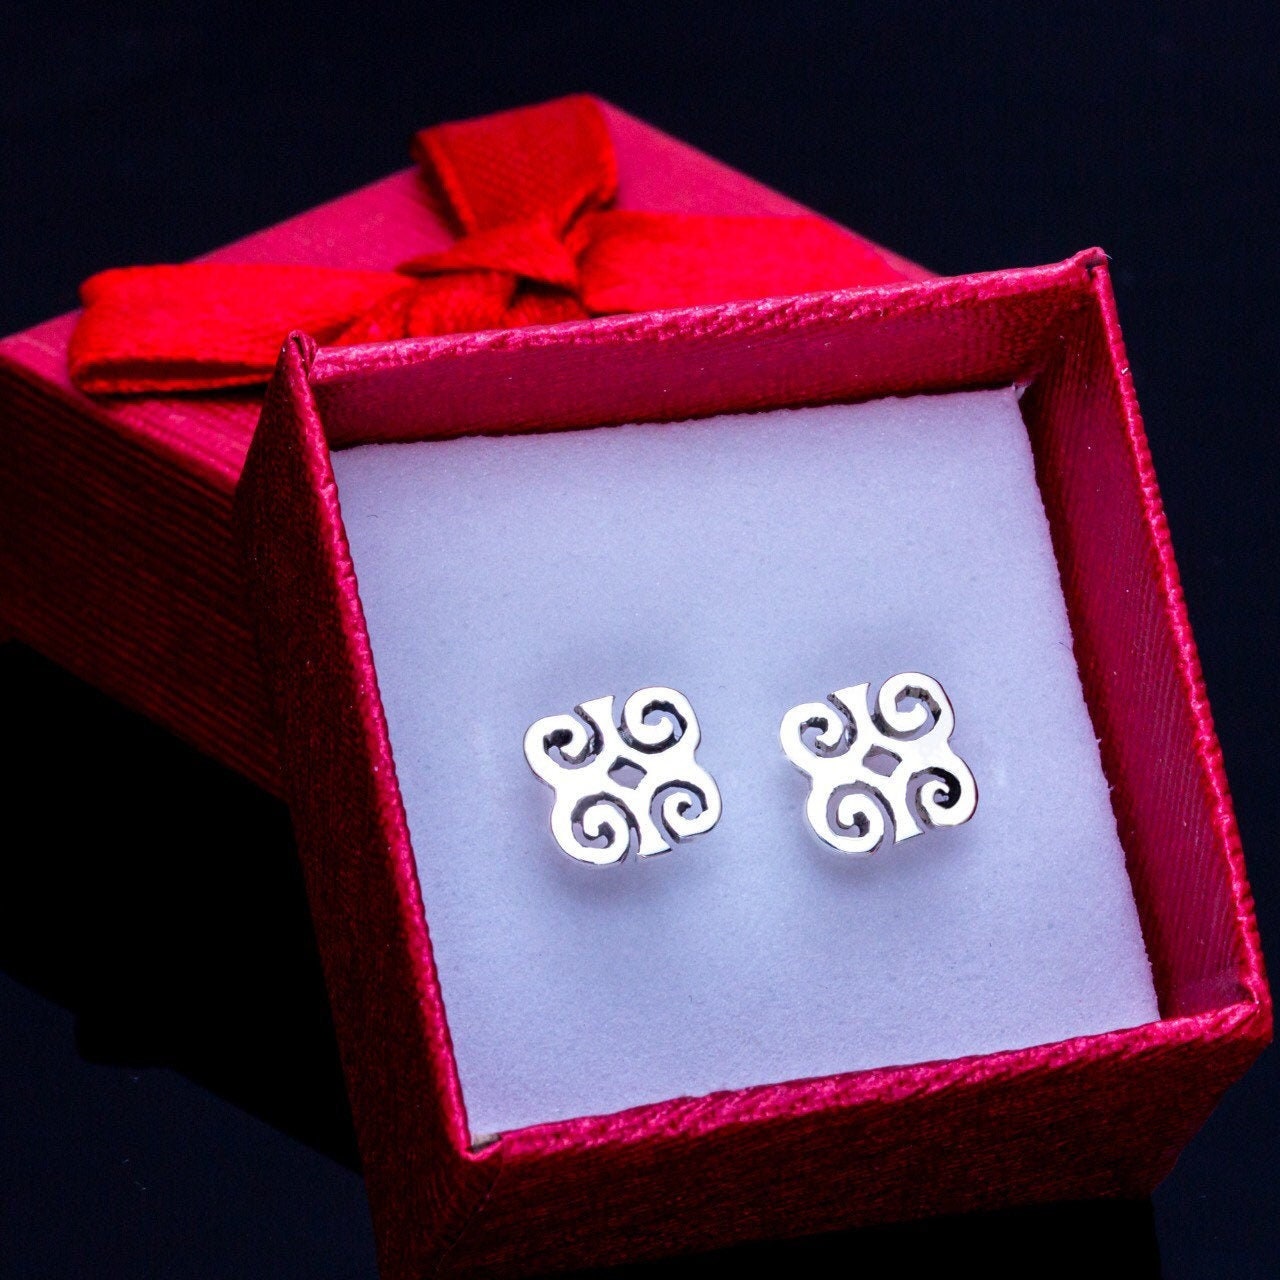 Meaningful Stud Earrings, Ghanaian, Adinkra Symbol Jewelry, Gift For Inner Strength & Humility, Man, Lady, Everyday Wear, Black Owned Shop